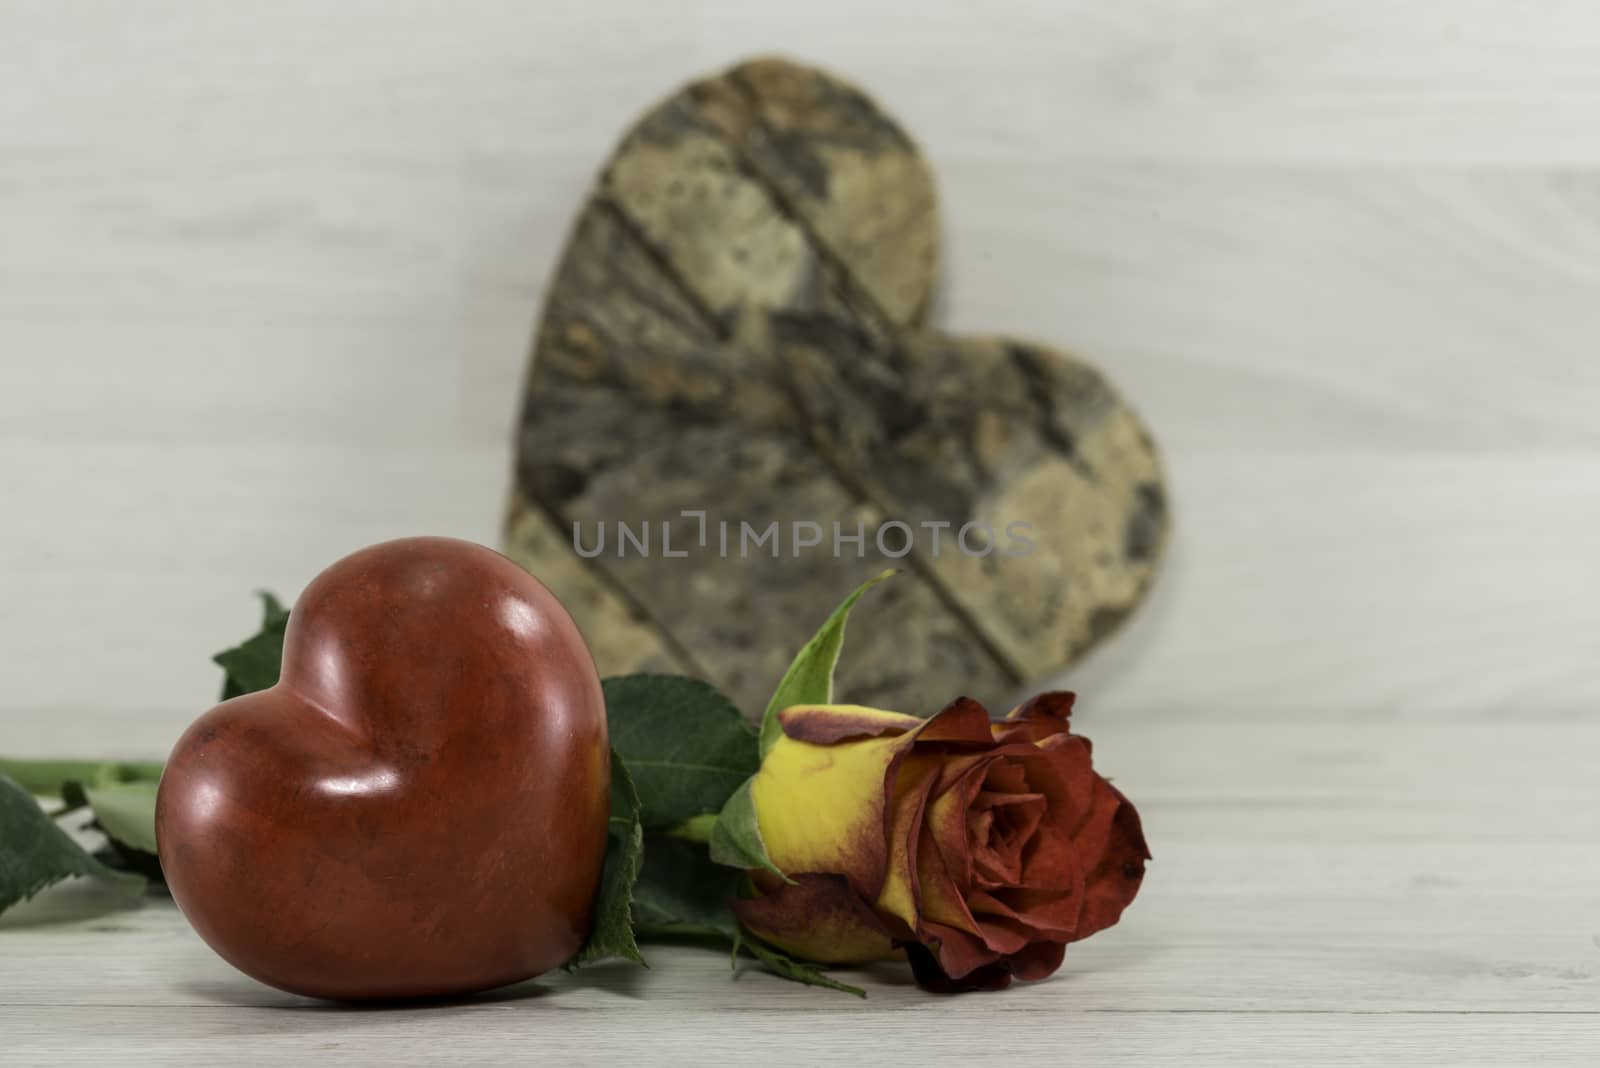 red rose with heart shape on wooden background for kothers day or valentines